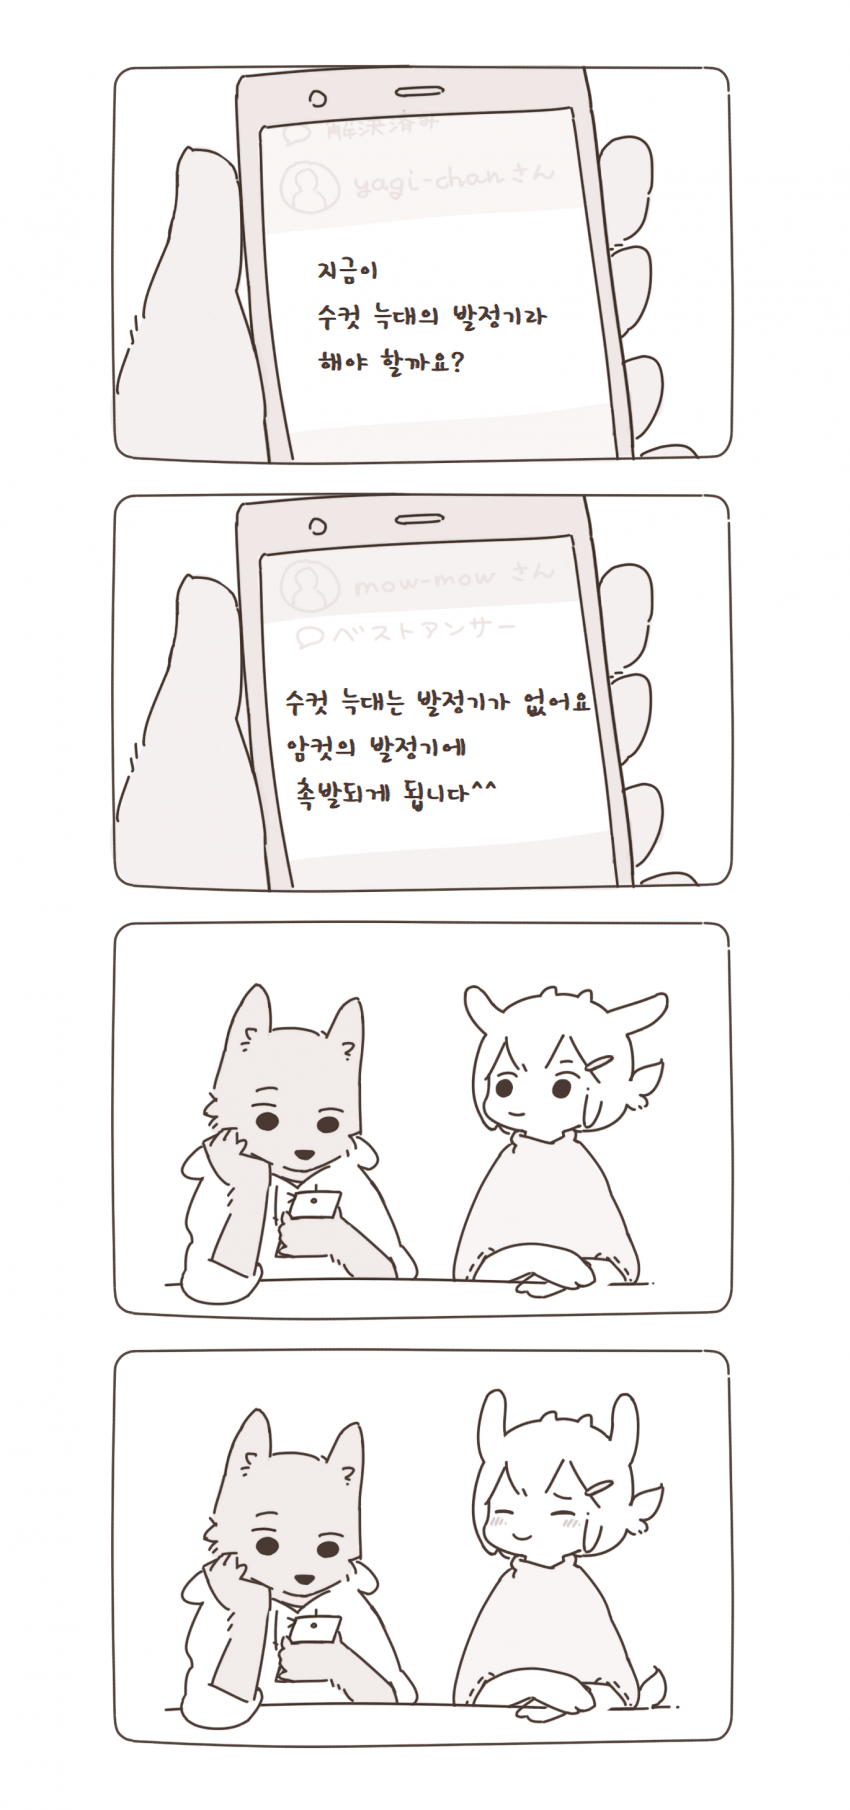 furry-20210909-112203-009.png